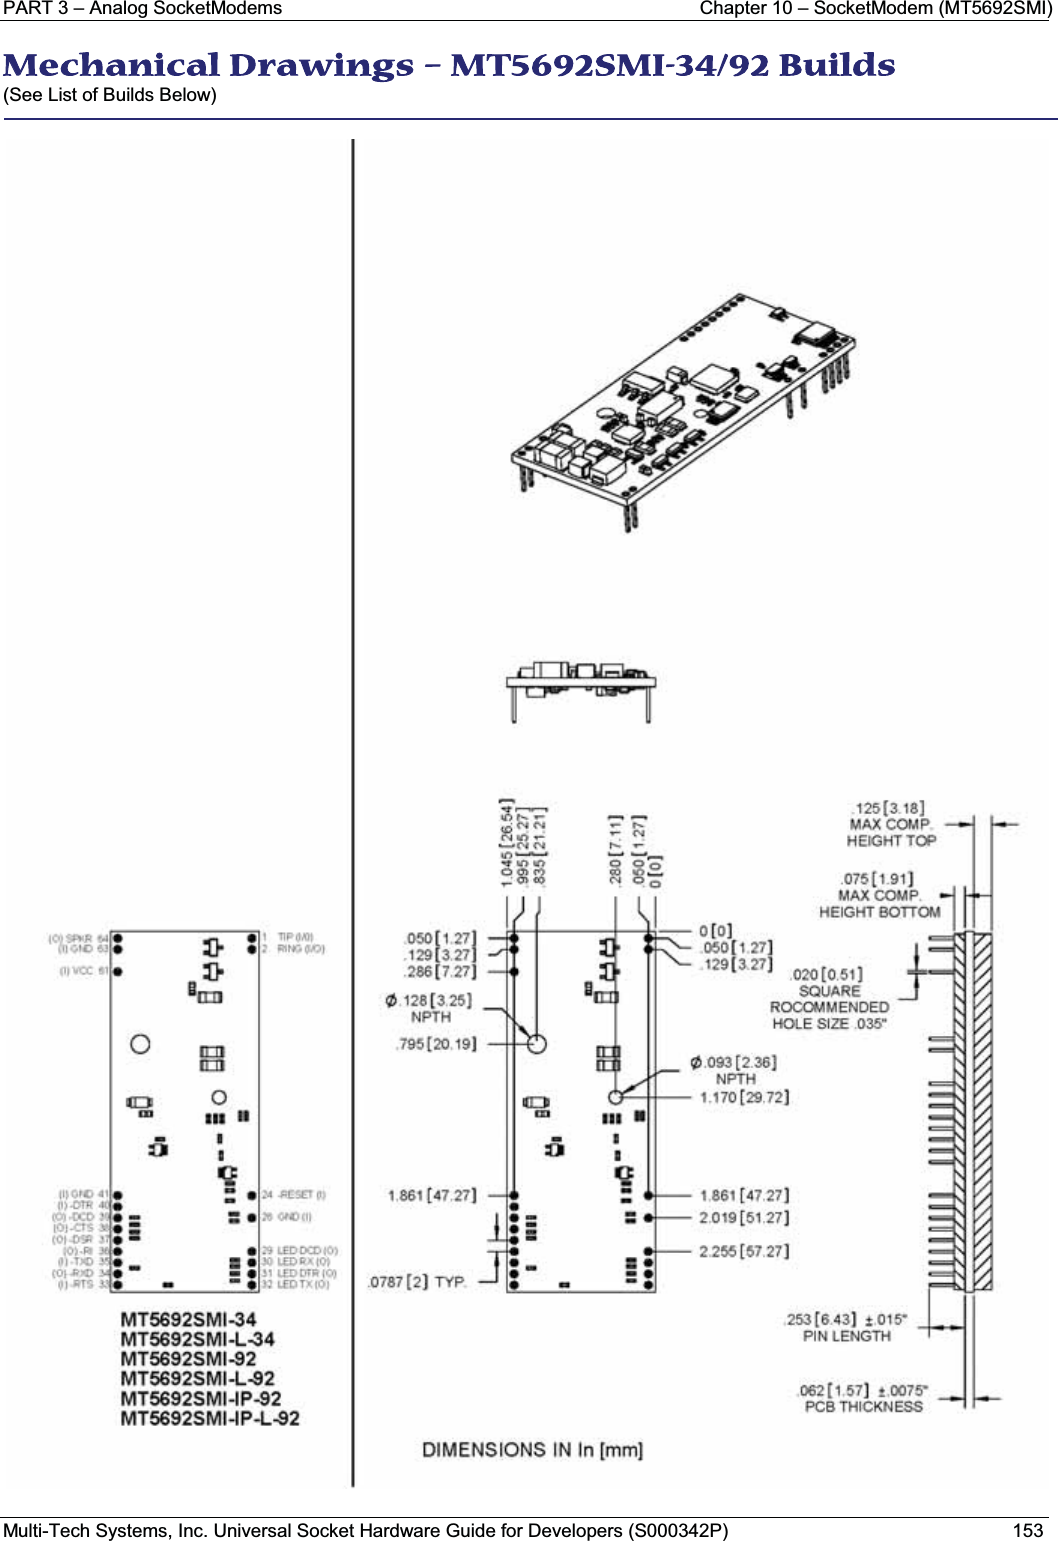 PART 3 – Analog SocketModems Chapter 10 – SocketModem (MT5692SMI)Multi-Tech Systems, Inc. Universal Socket Hardware Guide for Developers (S000342P) 153MMechanical Drawings – MT5692SMI-34/92 Builds  (See List of Builds Below)